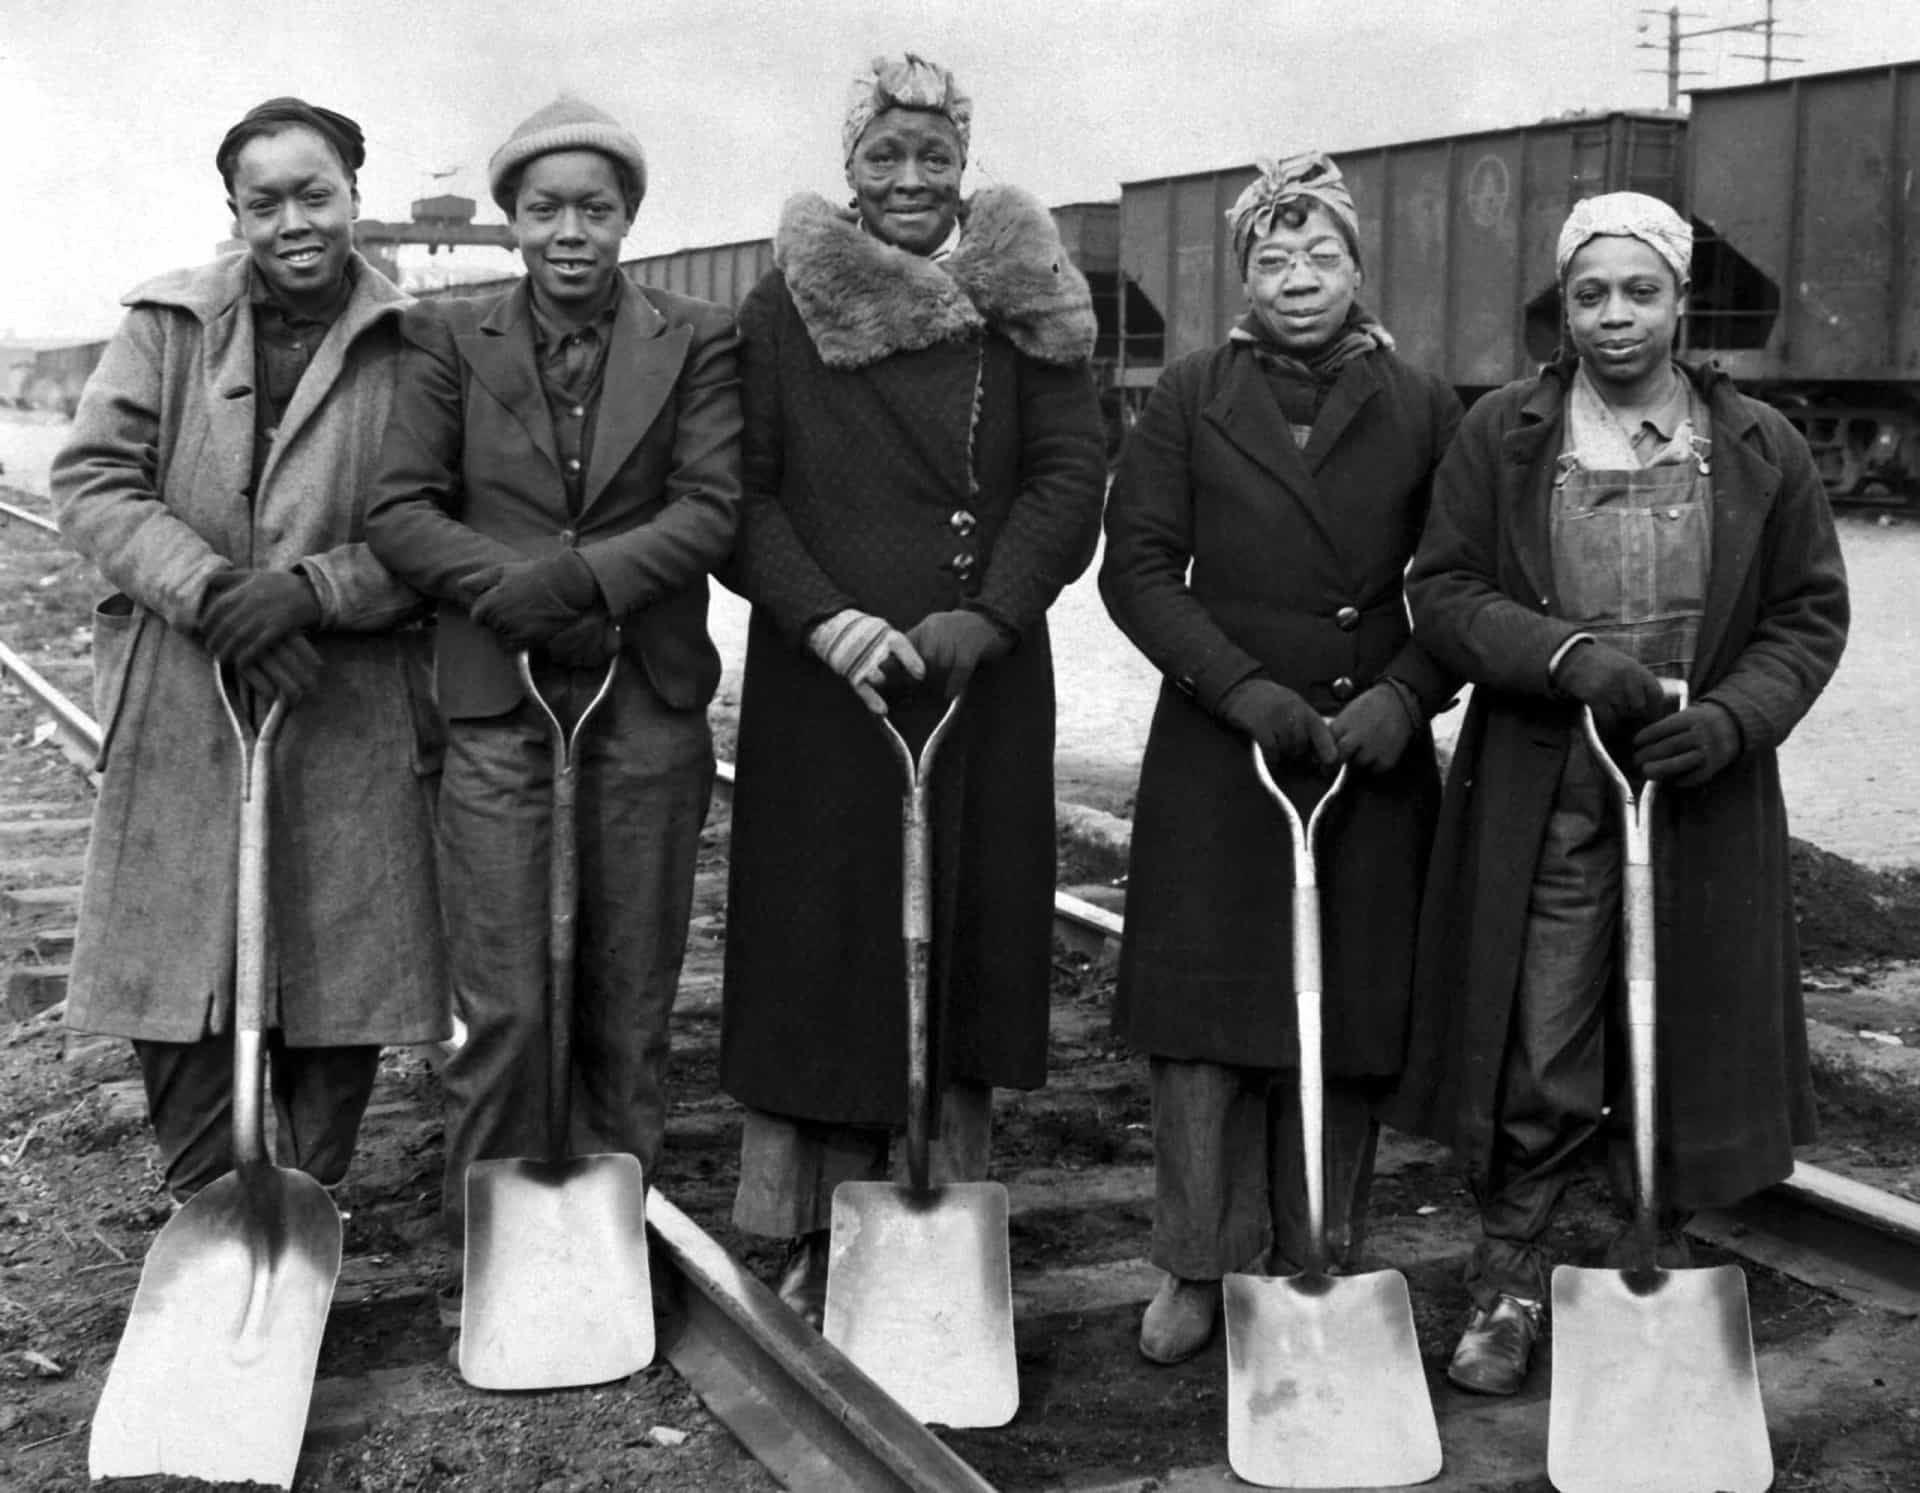 <p>Here, five African-American women pause for the camera in 1943 while working with the Baltimore & Ohio Railroad as trackwomen. They helped maintain and inspect railroad tracks.</p><p>You may also like:<a href="https://www.starsinsider.com/n/238633?utm_source=msn.com&utm_medium=display&utm_campaign=referral_description&utm_content=517253en-us"> Famous faces accused of plagiarism or copyright infringement</a></p>